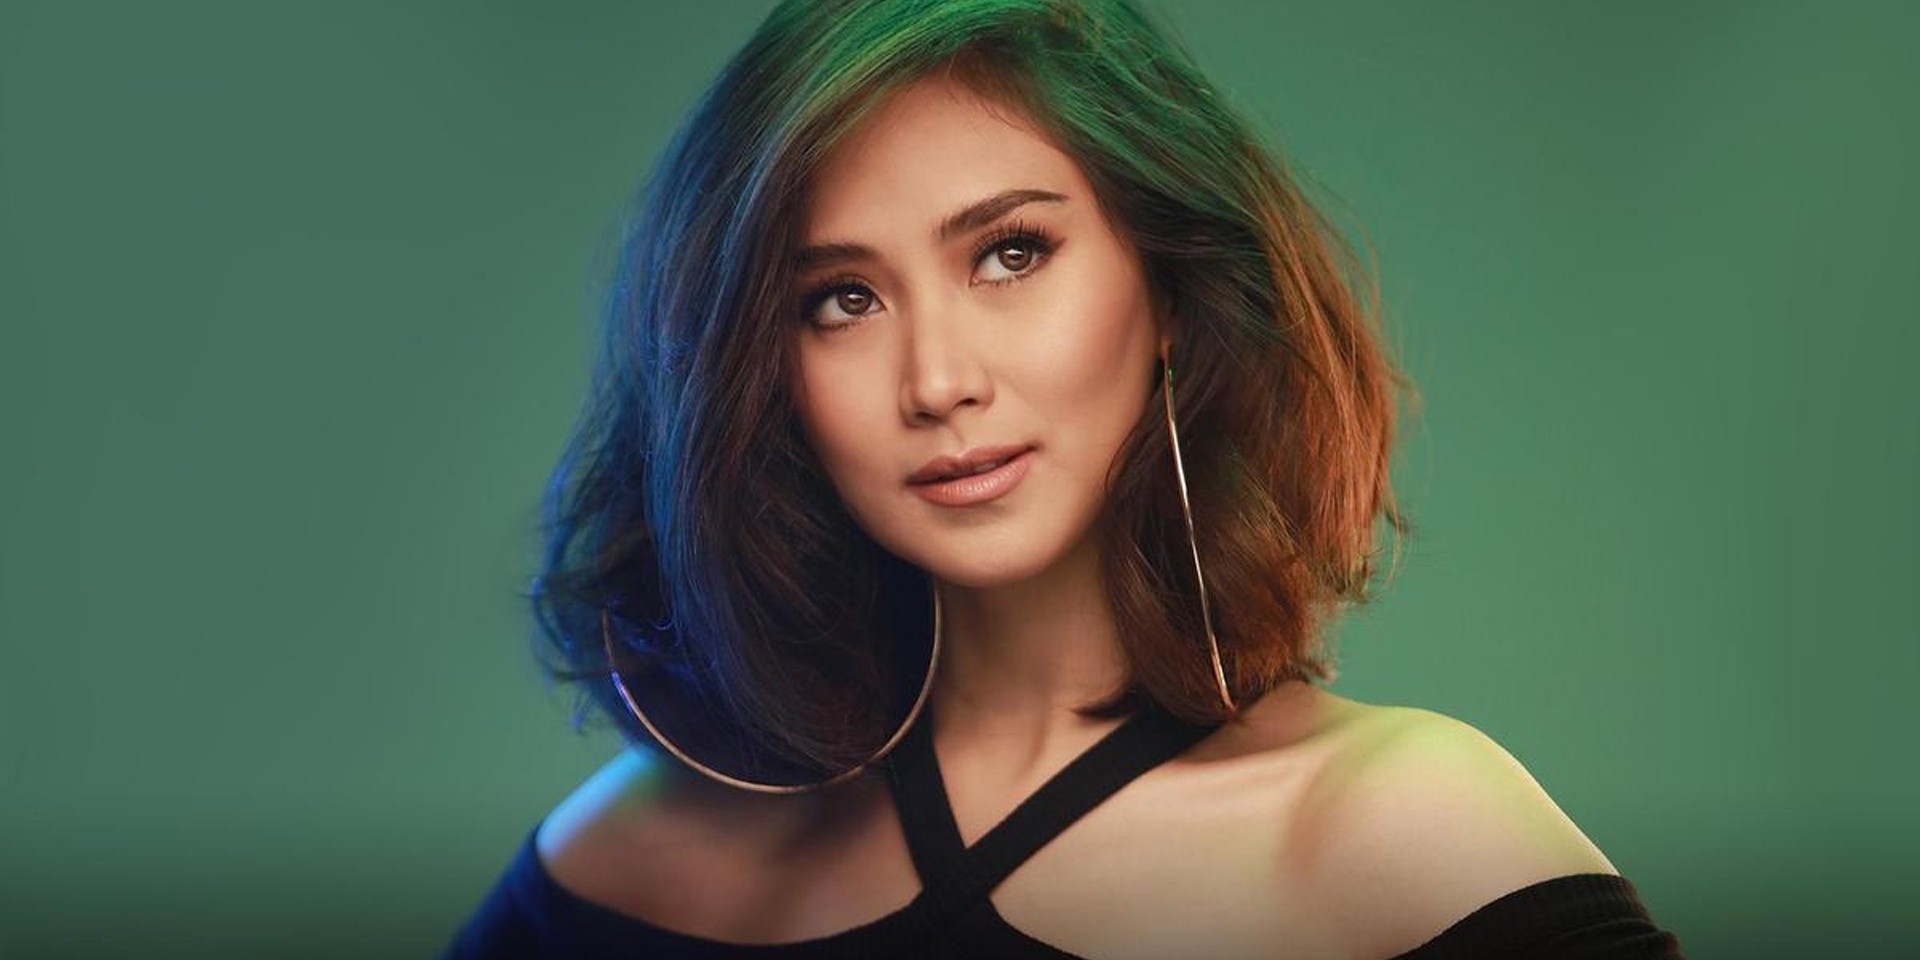 Sarah Geronimo heads to Netflix with concert film This 15 Me – watch